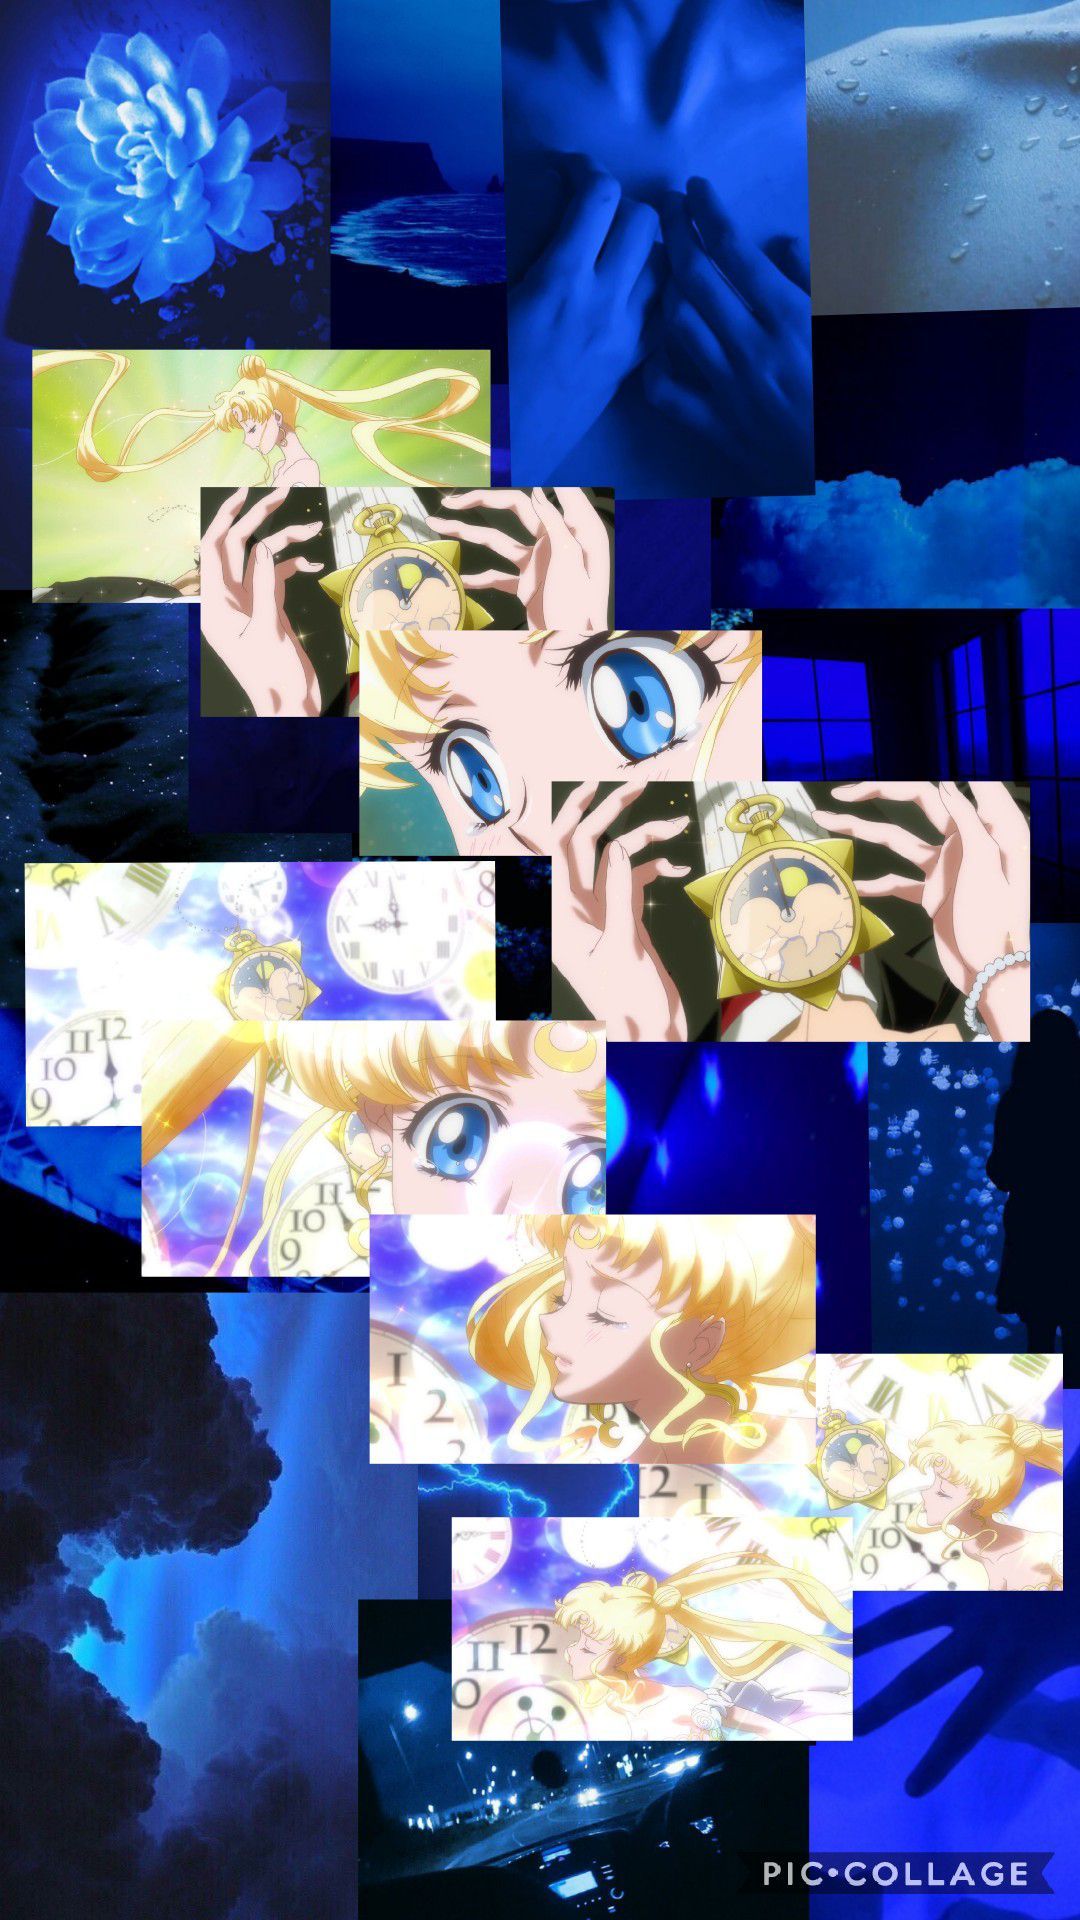 Aesthetic sailor moon wallpaper I made for my phone! - Sailor Moon